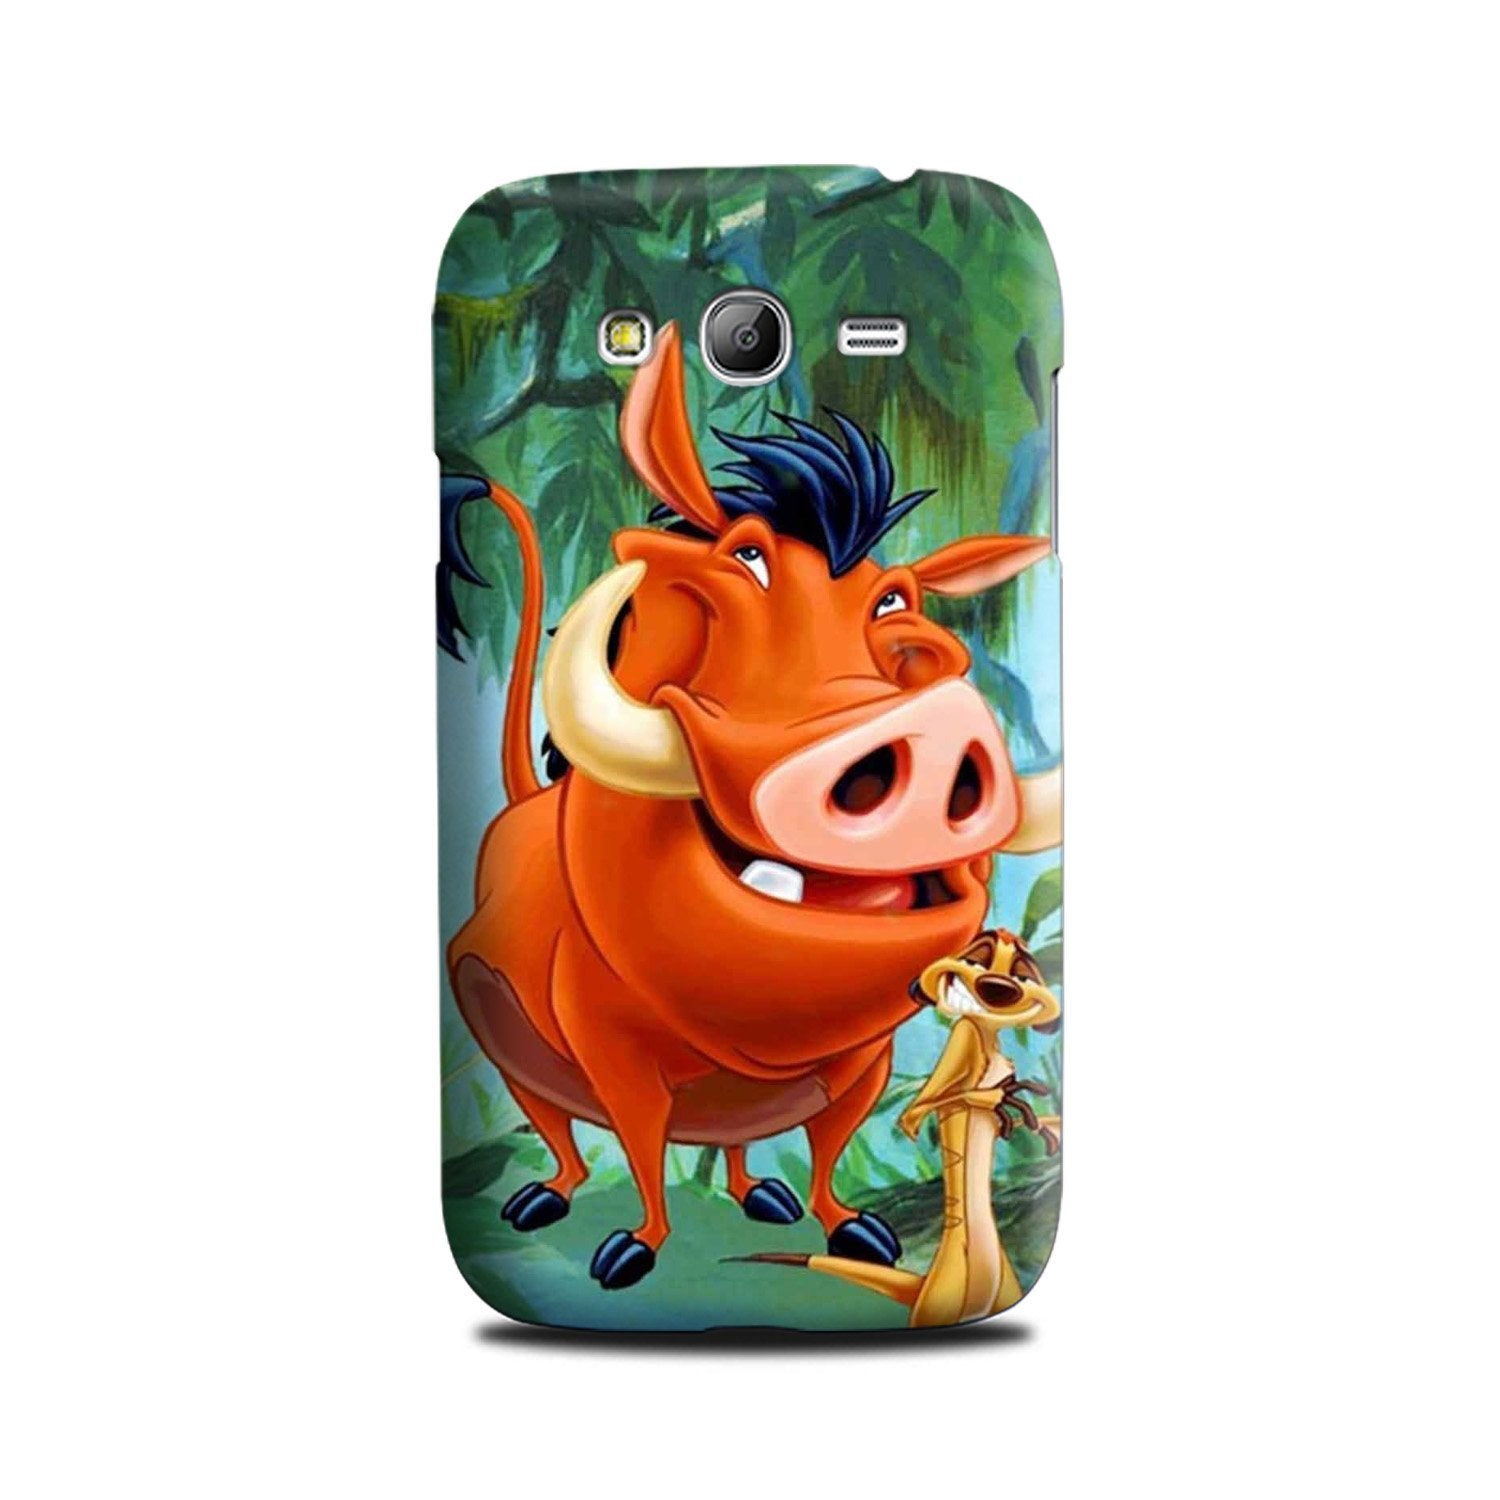 Timon and Pumbaa Mobile Back Case for Galaxy Grand Prime(Design - 305)